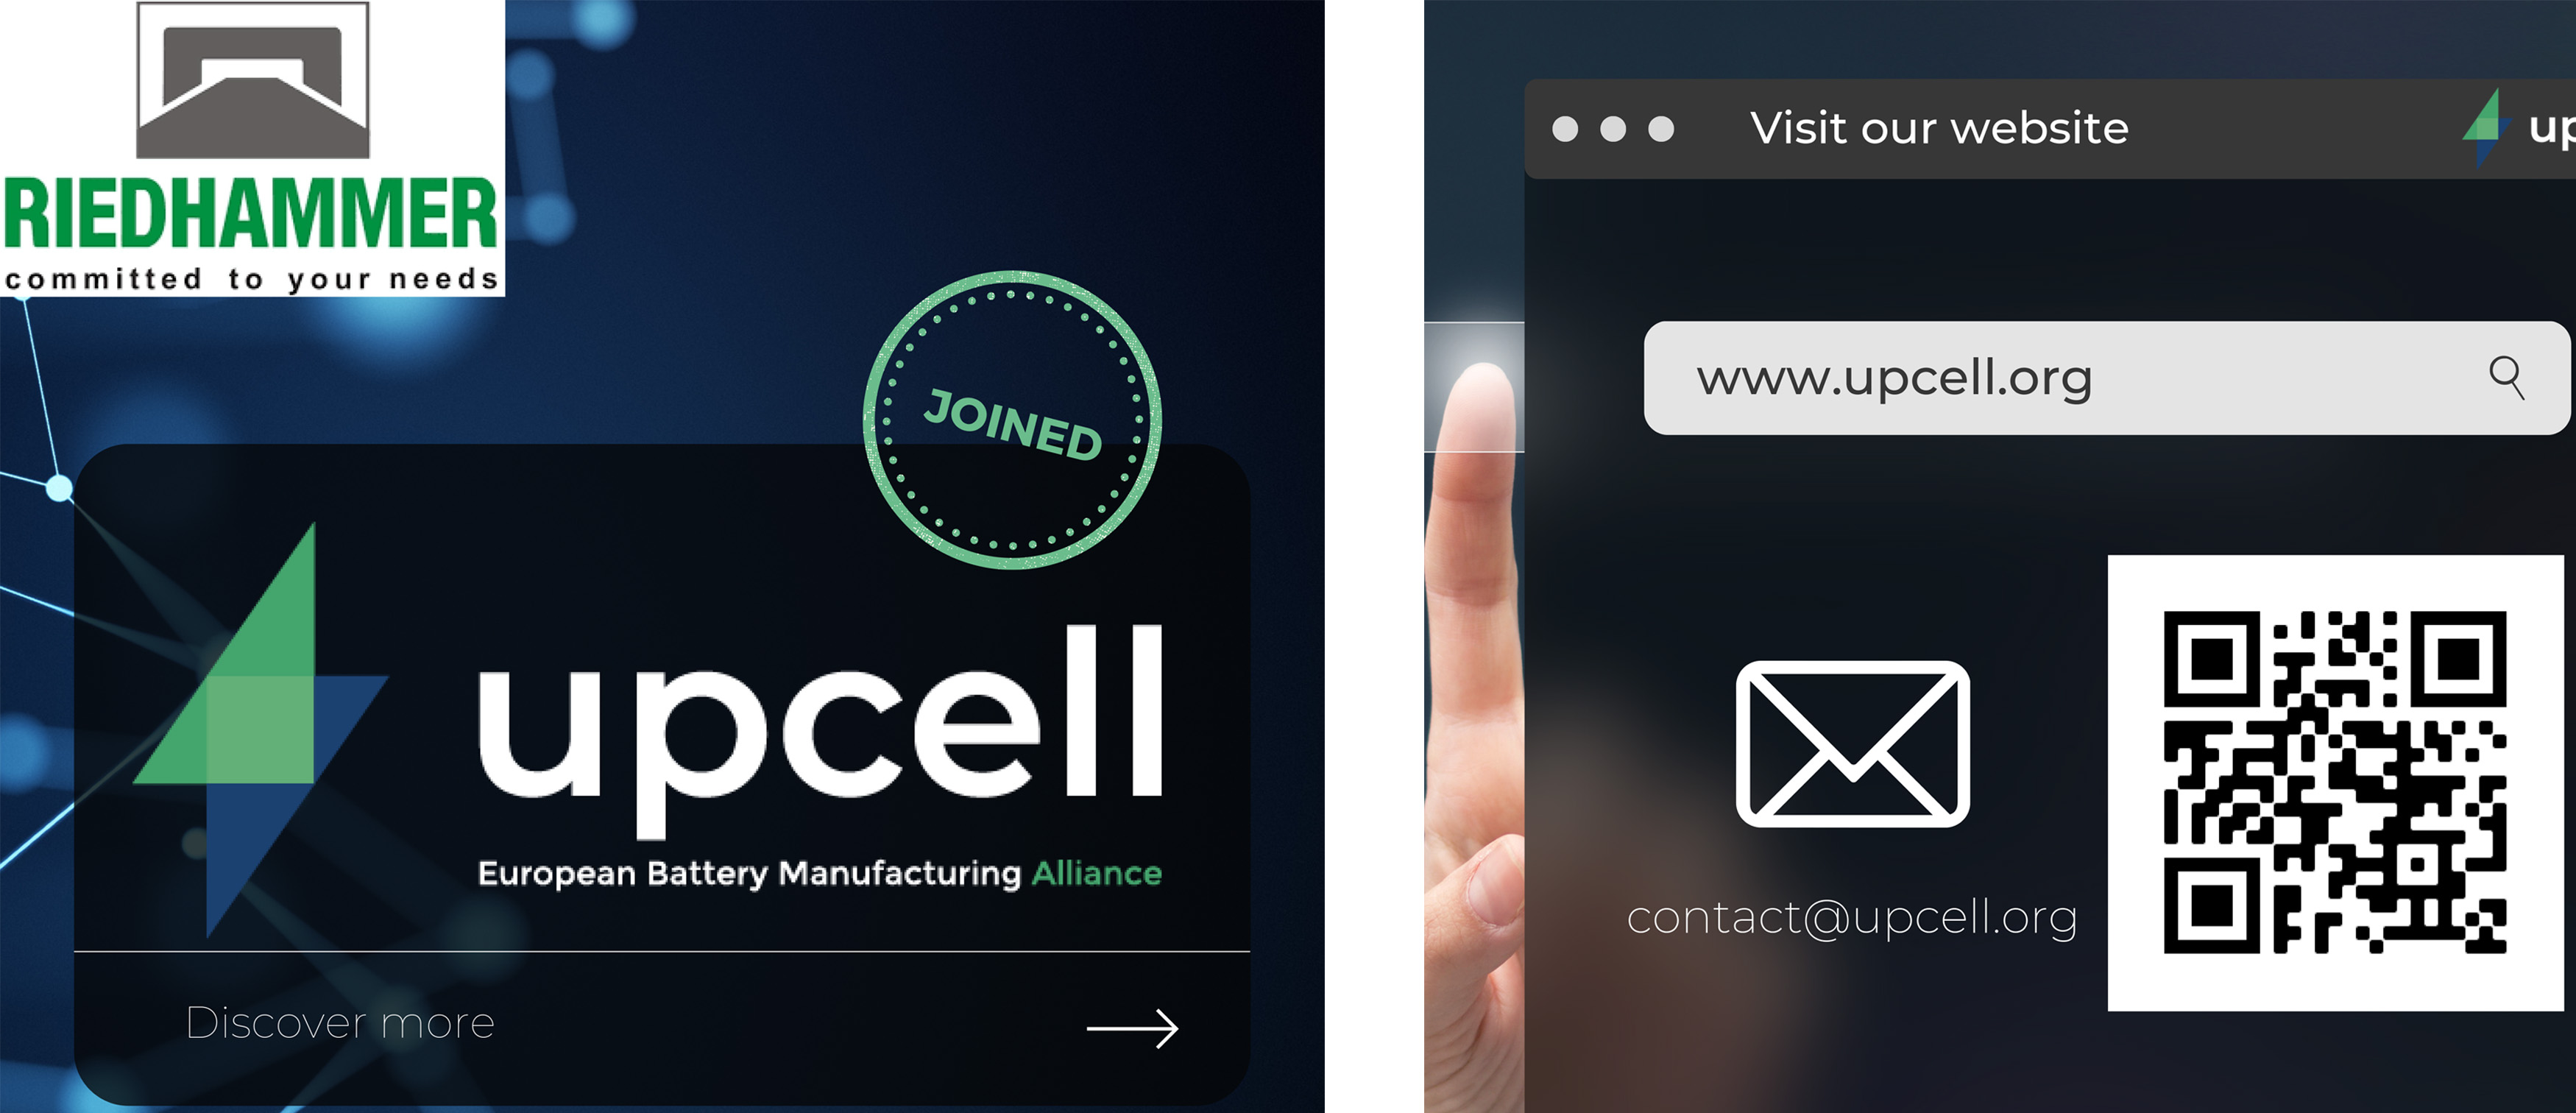 Riedhammer joined Upcell - European Battery Manufacturing Alliance